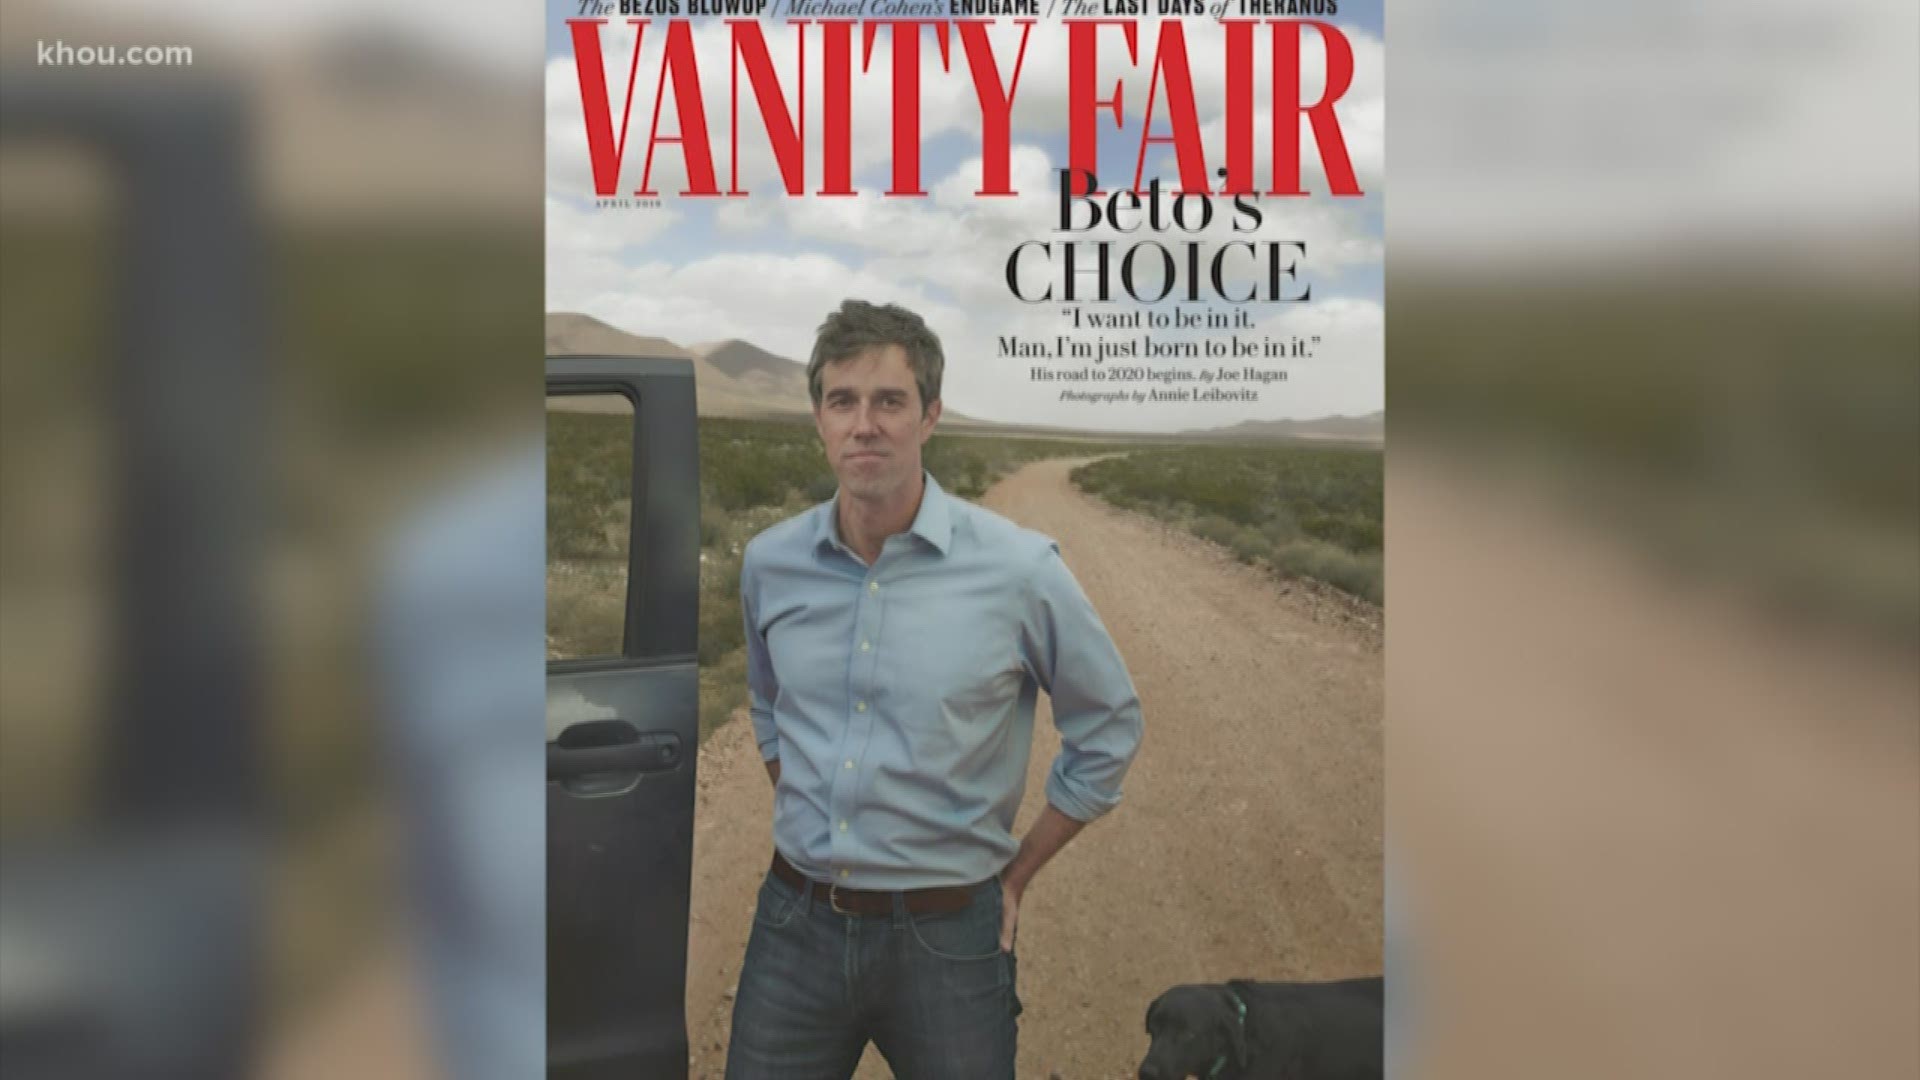 Social media was buzzing Wednesday night about whether O’Rourke is officially putting his hat in the ring for a 2020 presidential run, so the KHOU Verify team looked into those claims.